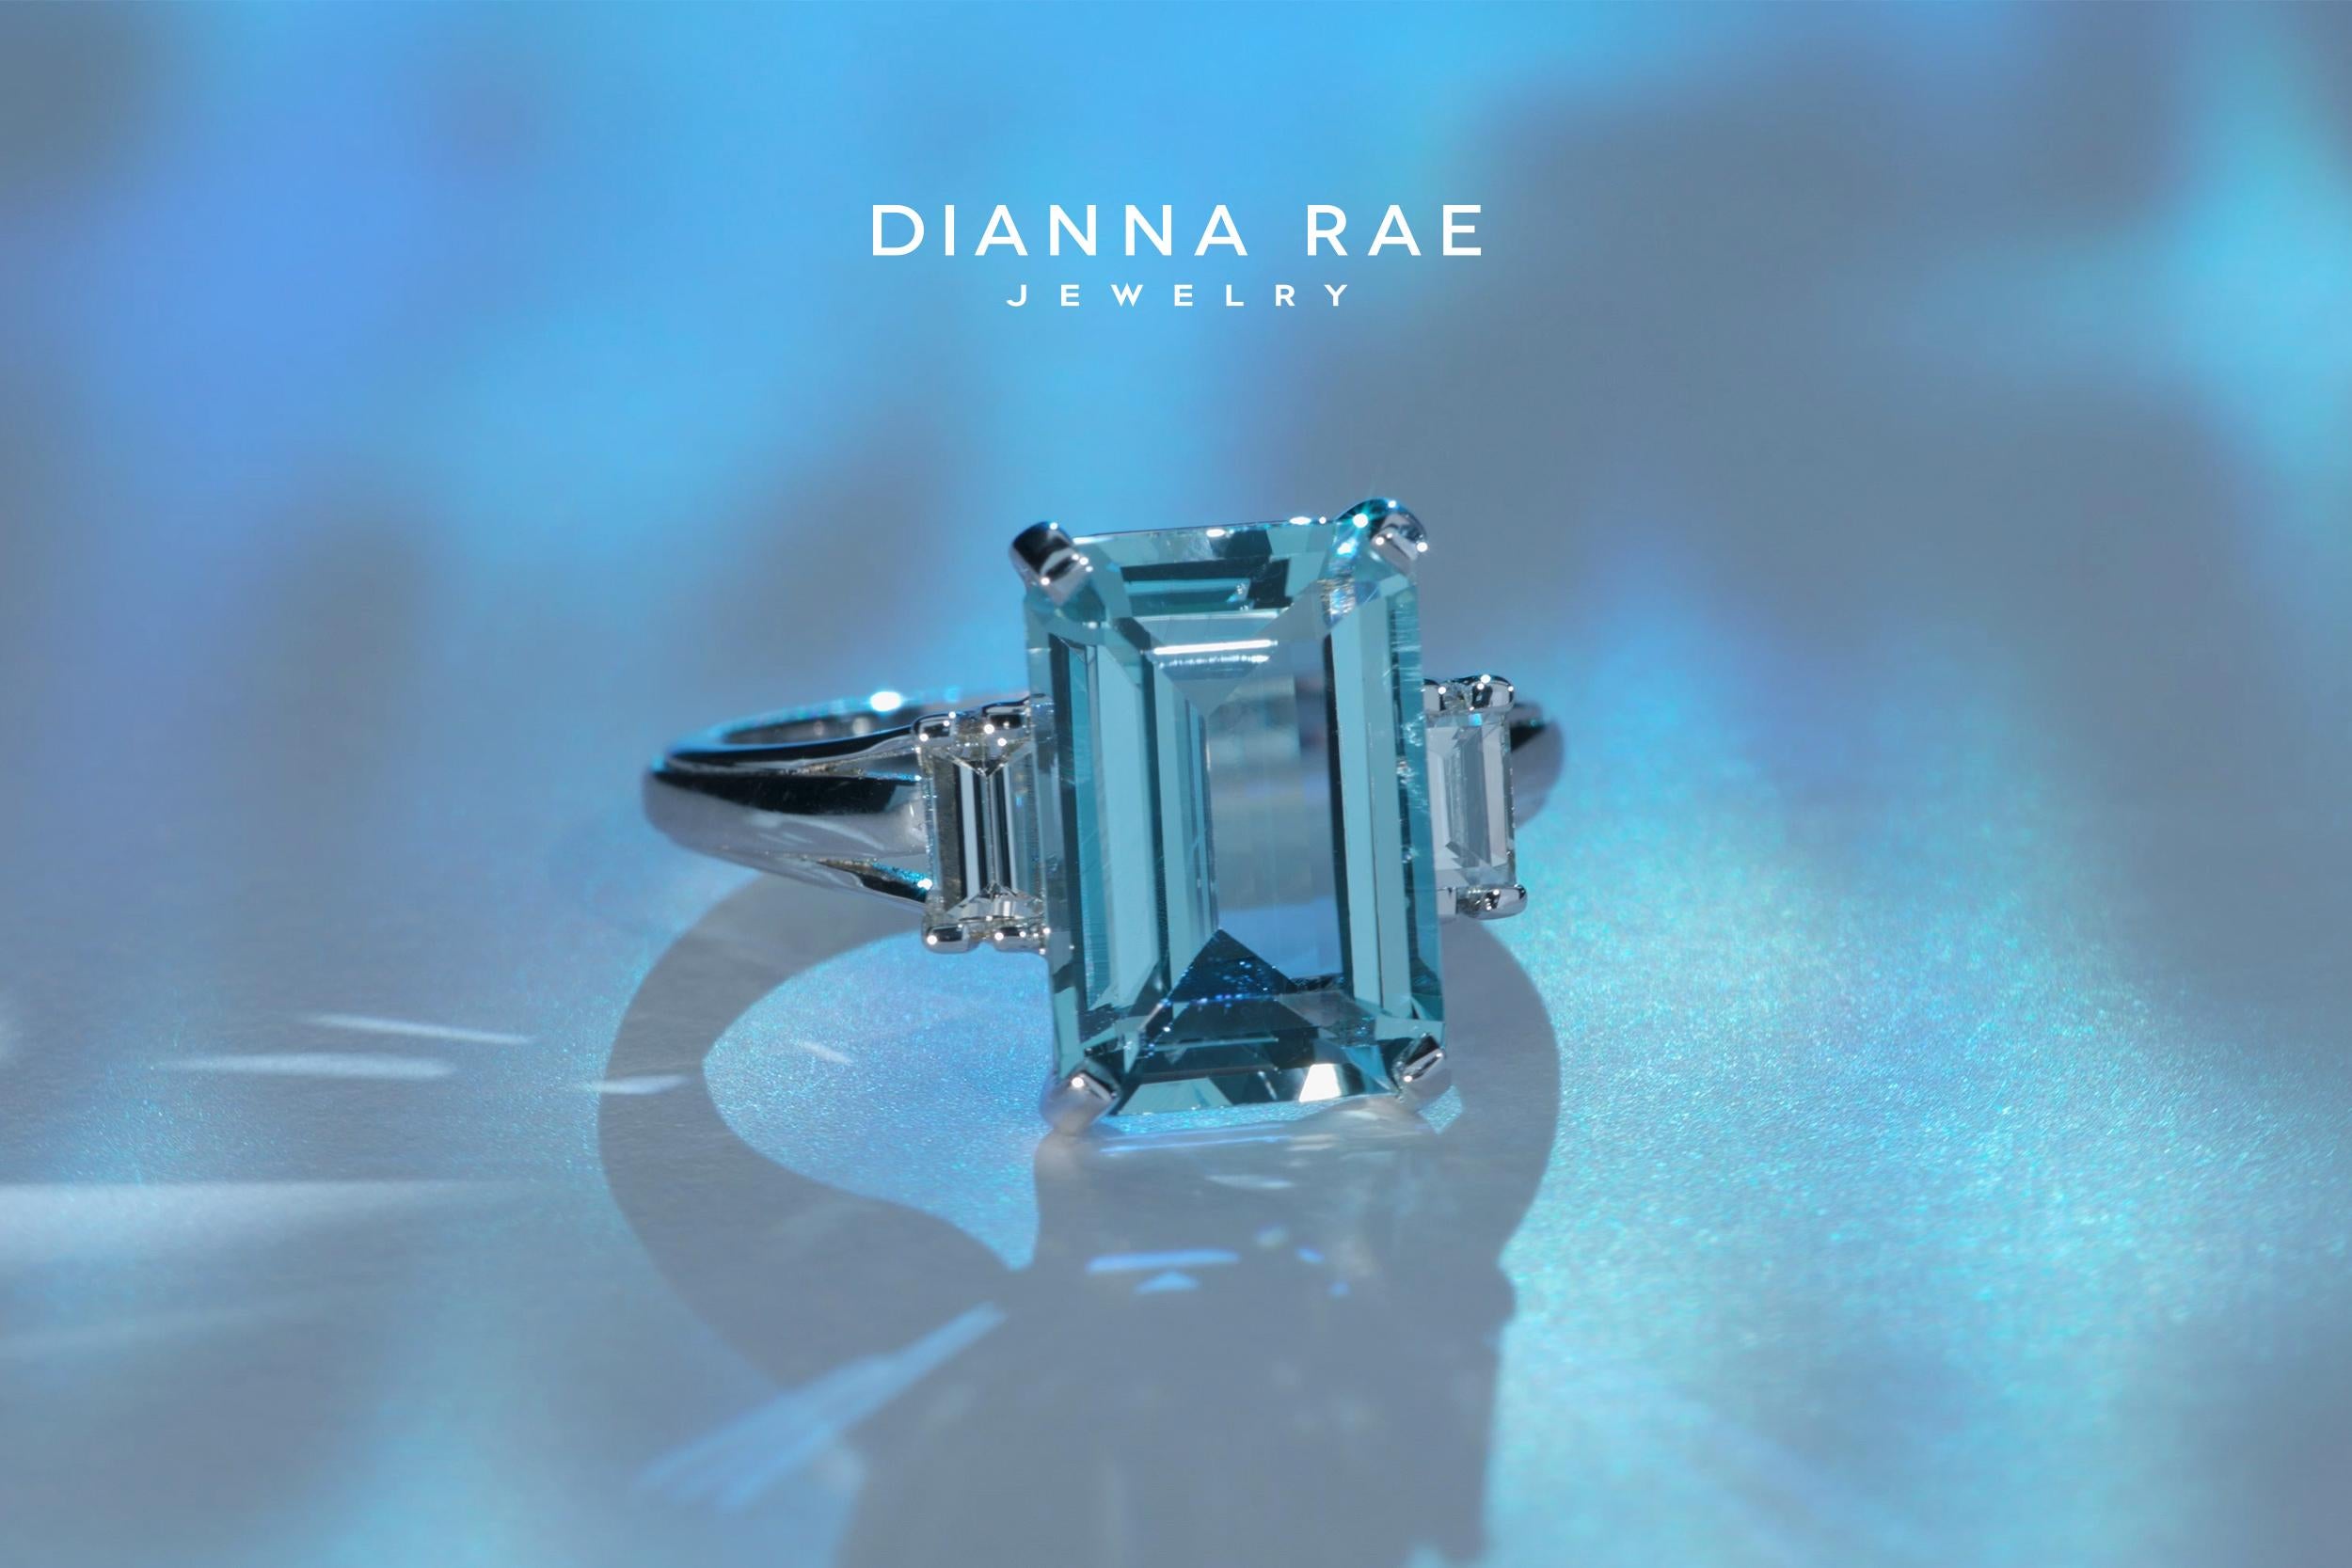 This three stone ring is studded with an emerald-cut Aquamarine and two baguette Diamonds. The sparkling diamonds beautifully highlight the center stone. Exuding a refined and opulent look, this prong set aquamarine and diamond ring is designed in